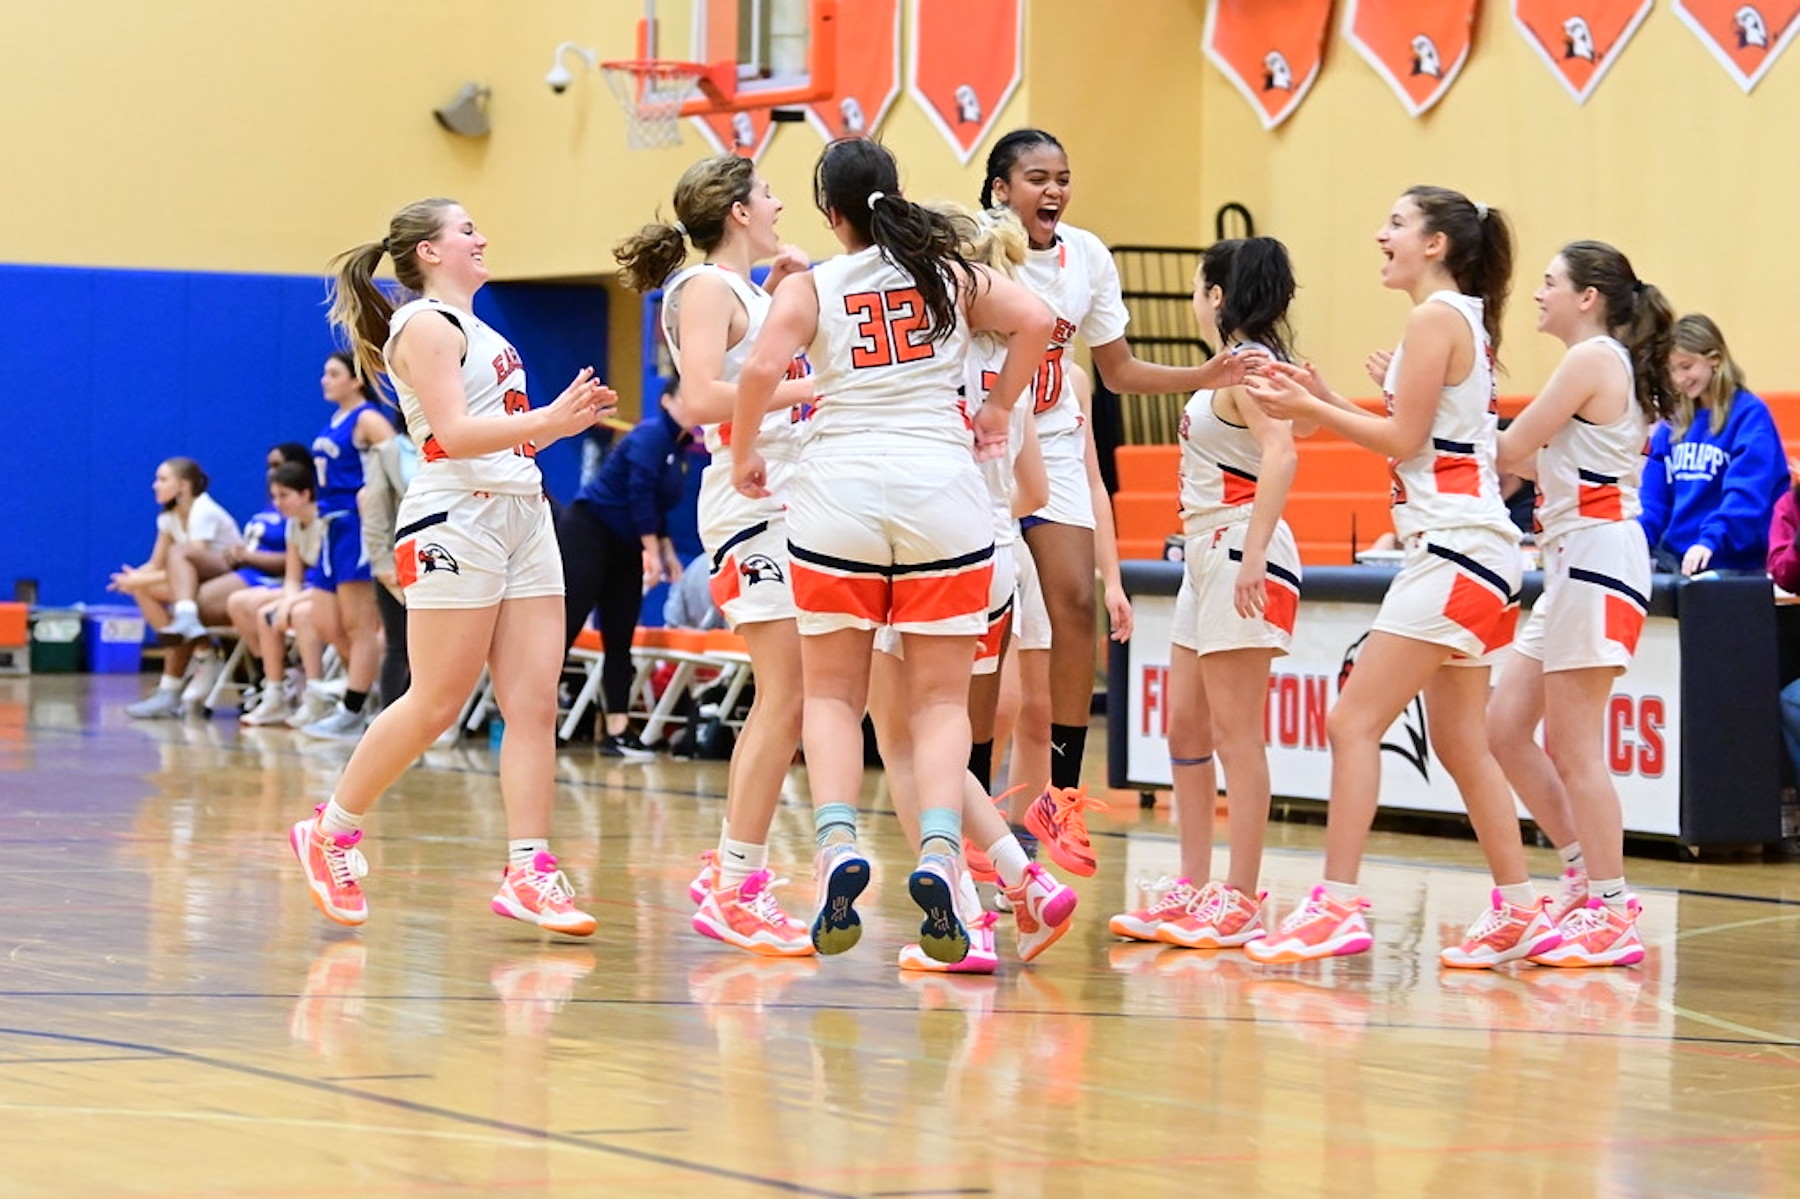 Fieldston Upper's girls varsity basketball team plays a game in the Varsity Gym. They celebrate a win!